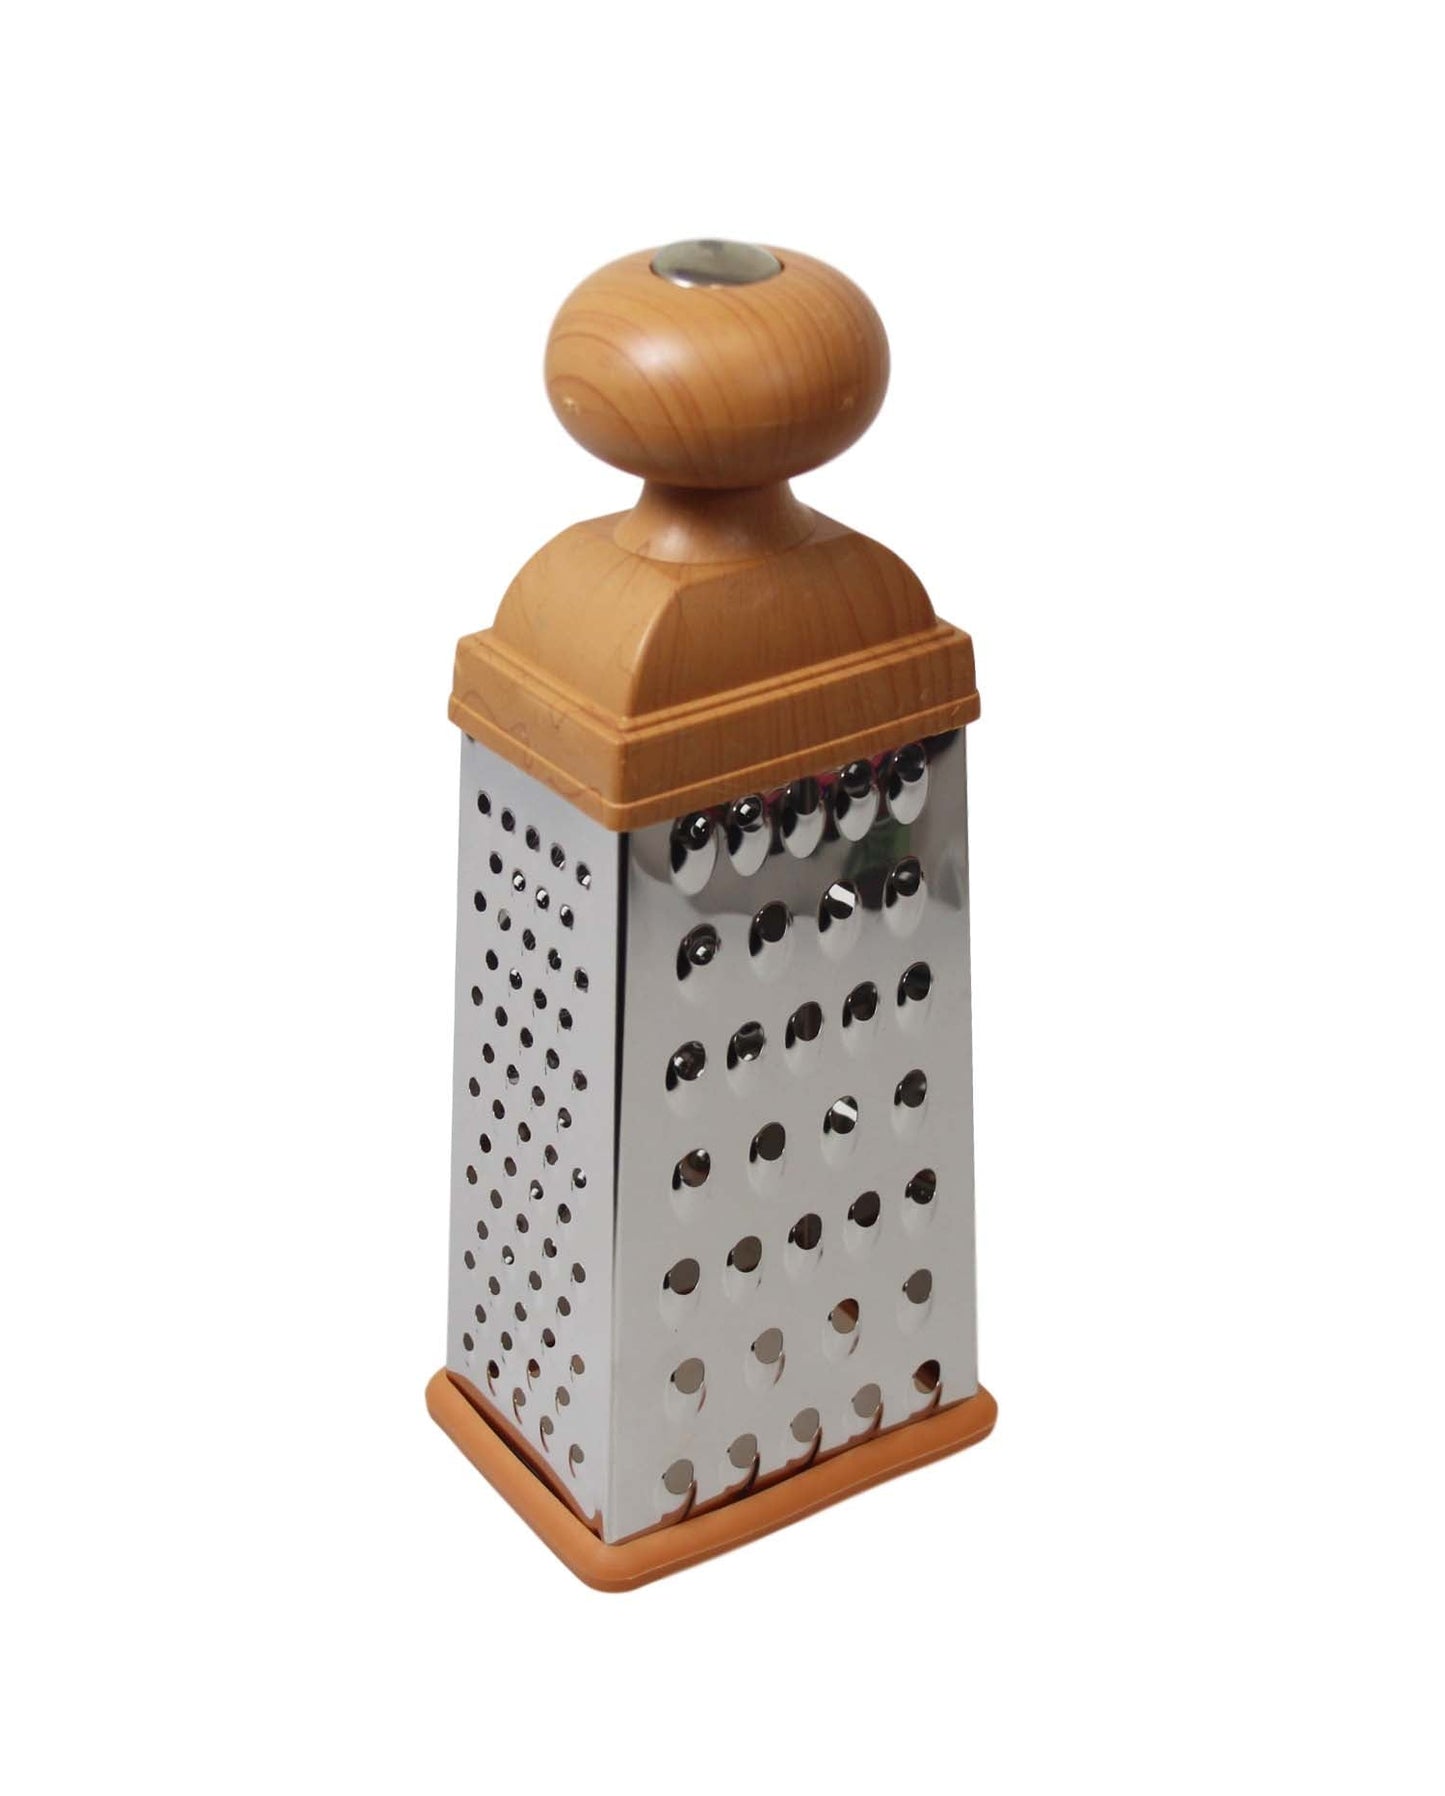 Kitchen Multipurpose Use 4 Sided Grater Ideal Food Prep Wooden Handle Grater 3140 (Parcel Rate)